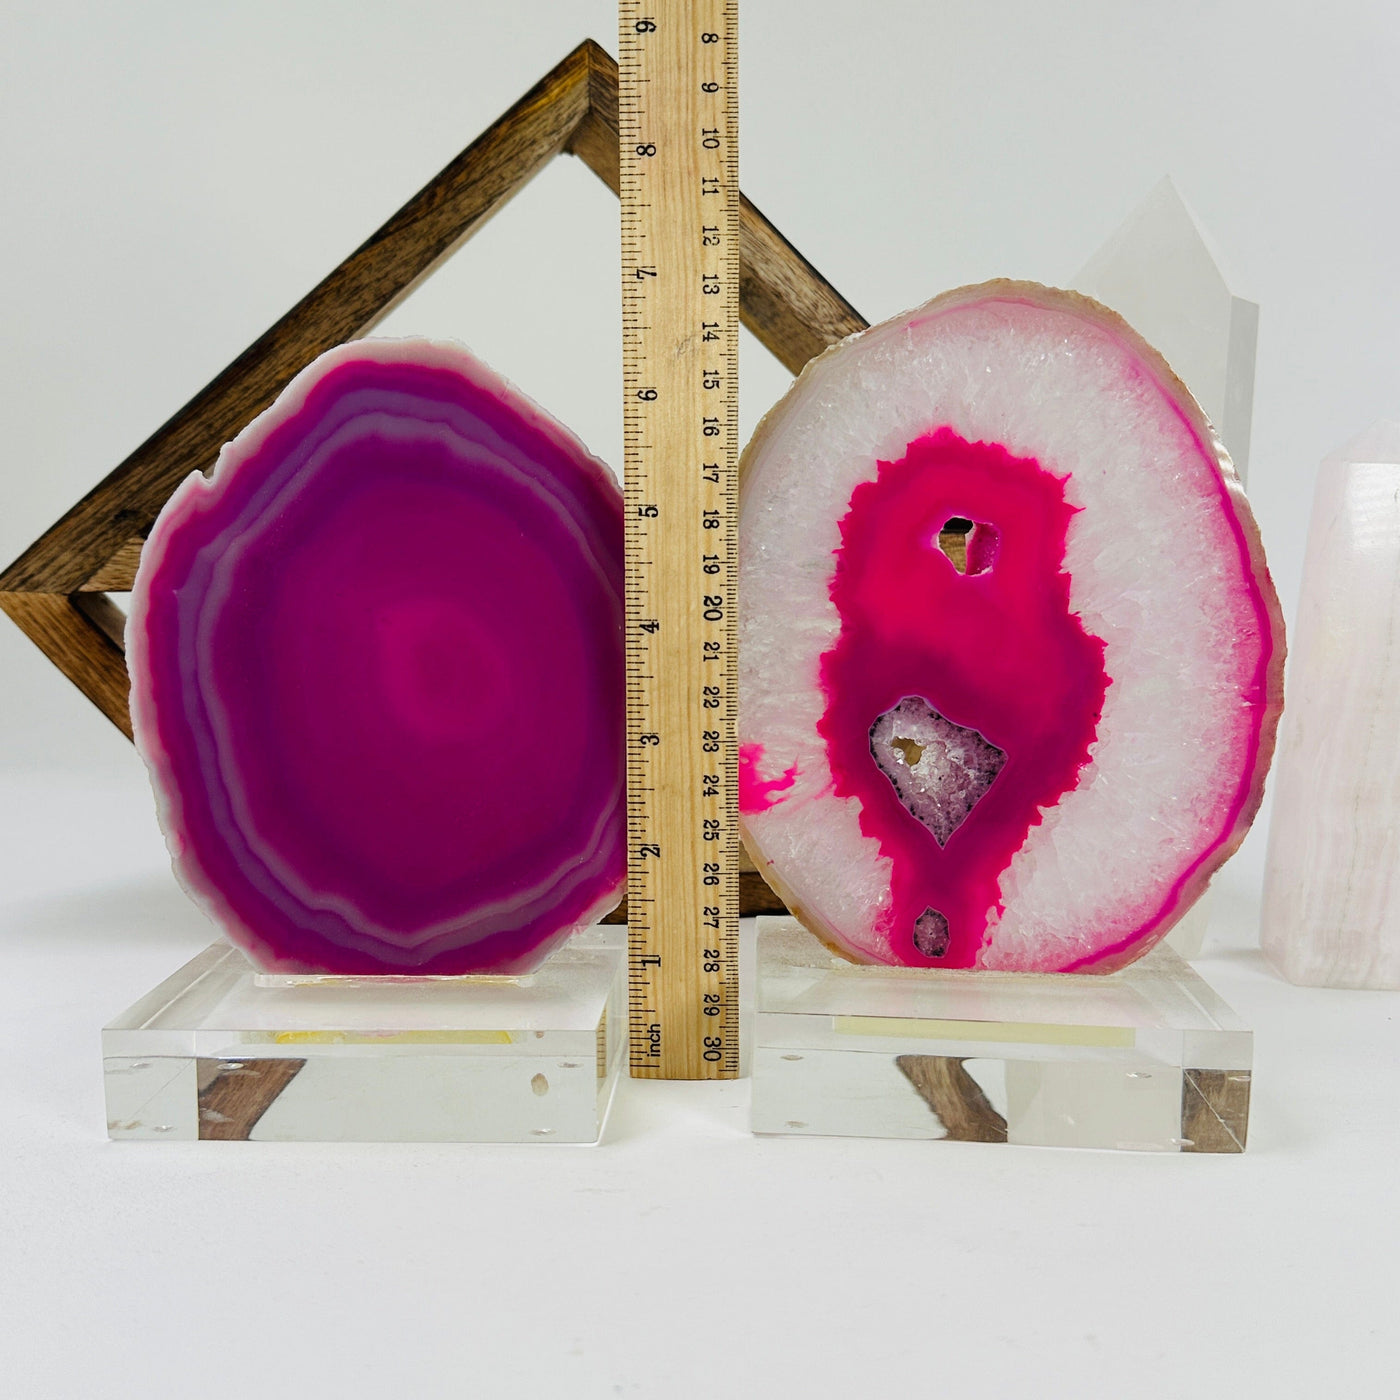 pink agate slice on acrylic stand next to a ruler for size reference